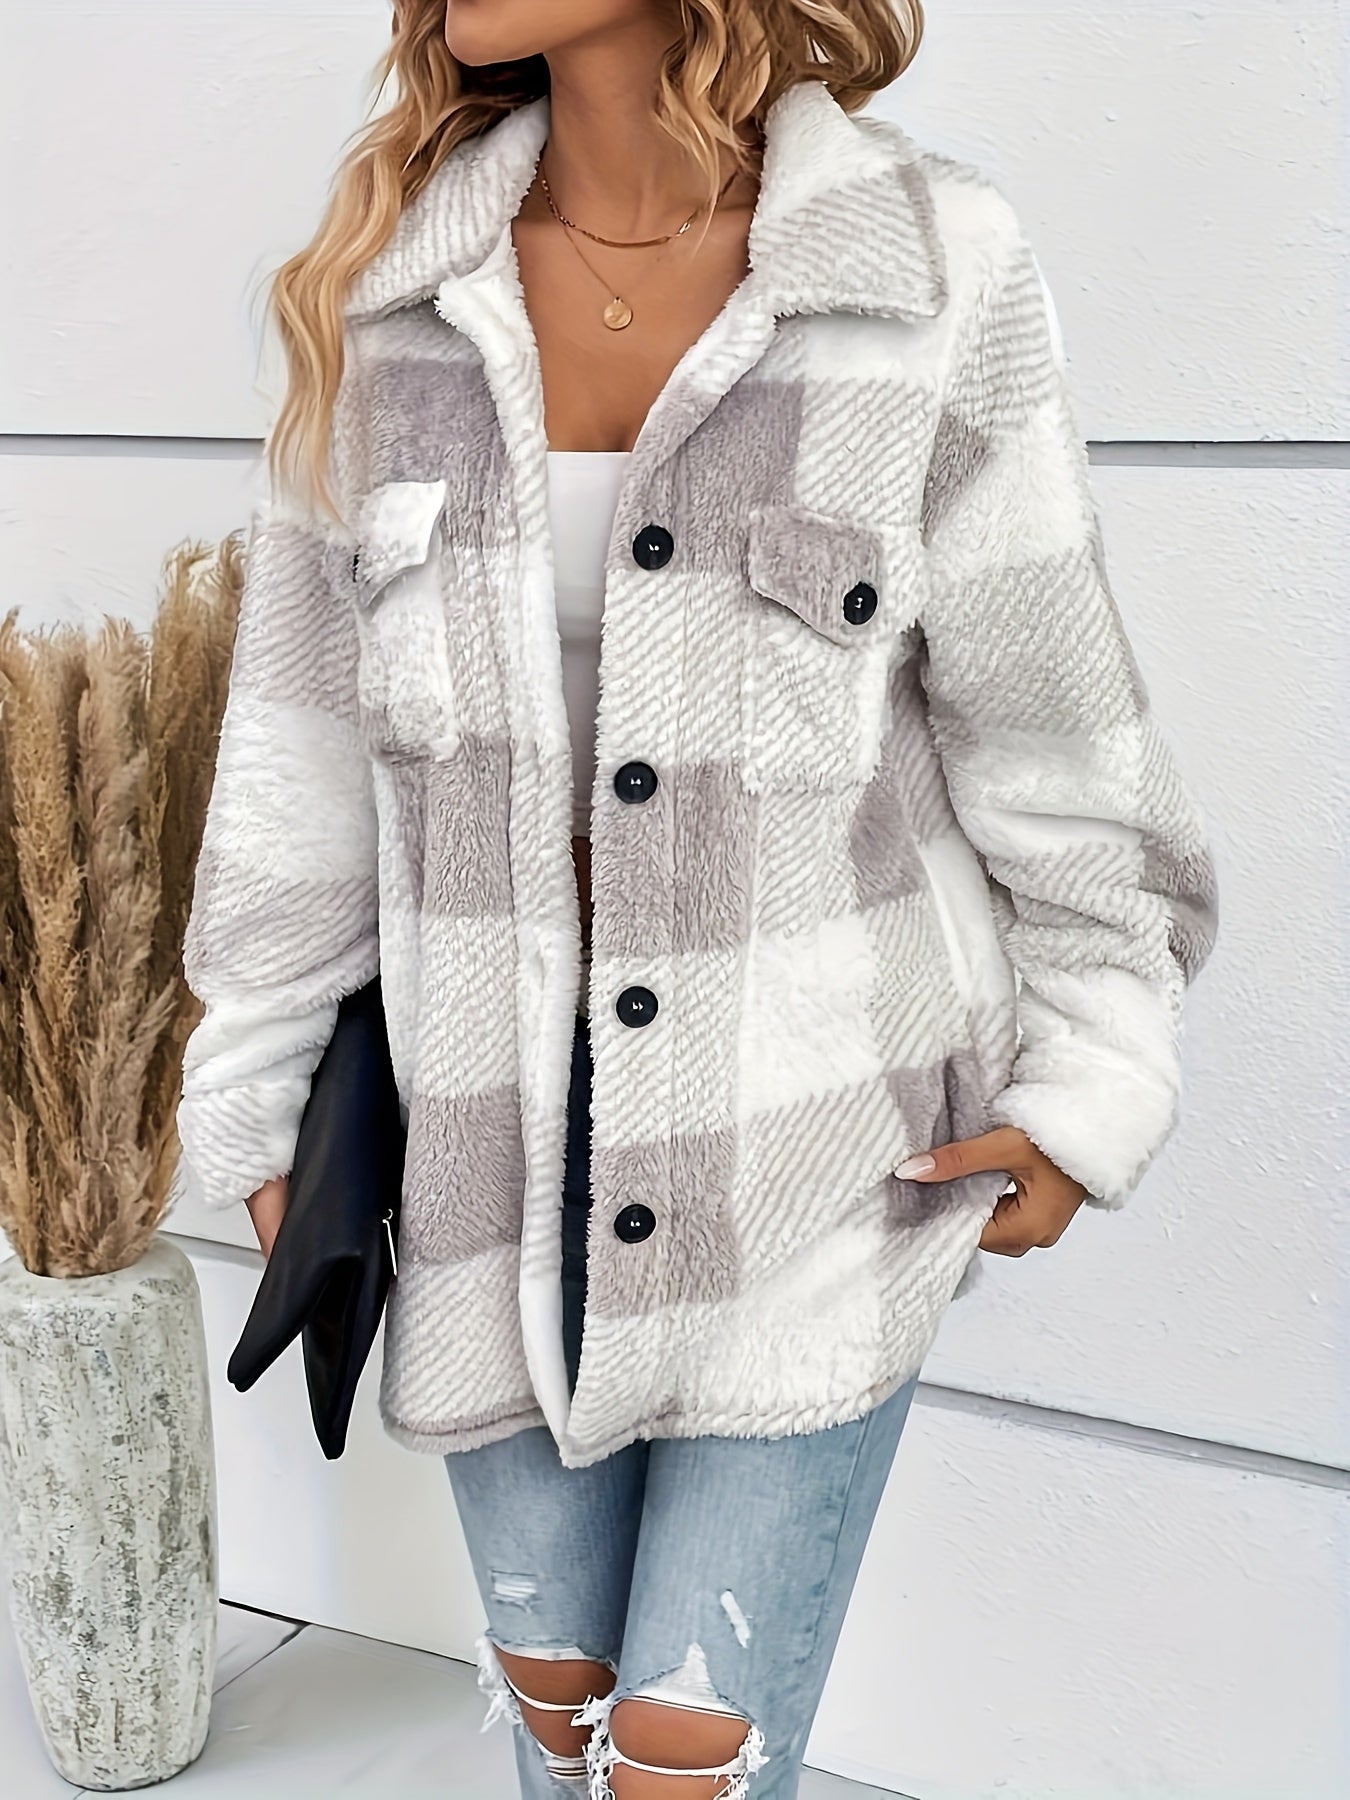 Plaid Fuzzy Fall & Winter Jacket, Casual Button Front Long Sleeve Outerwear, Women's Clothing